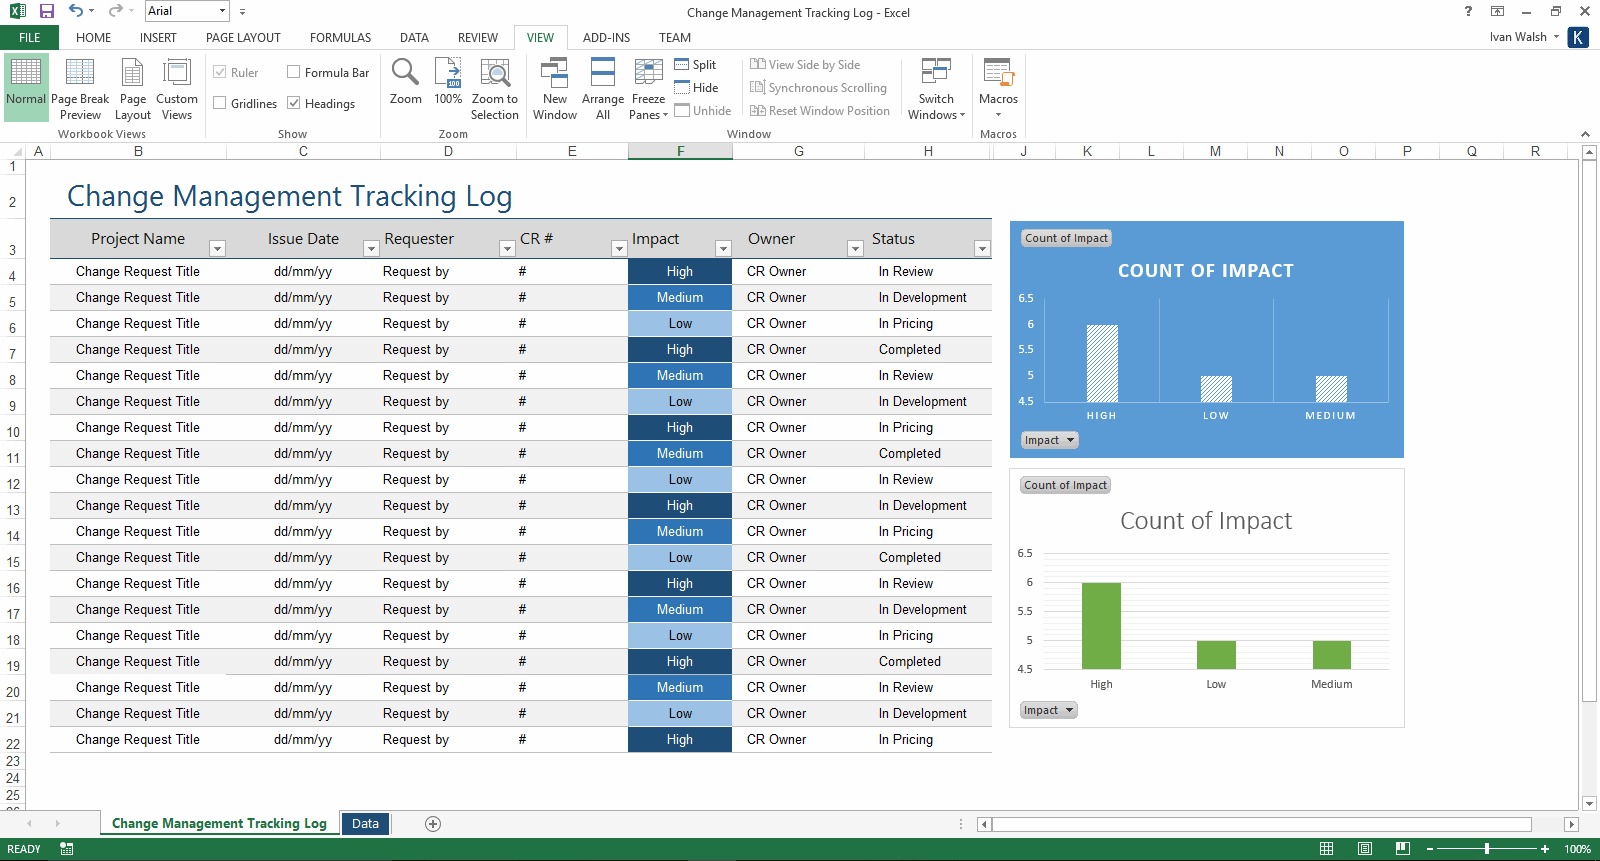 Contact Microsoft Excel Support